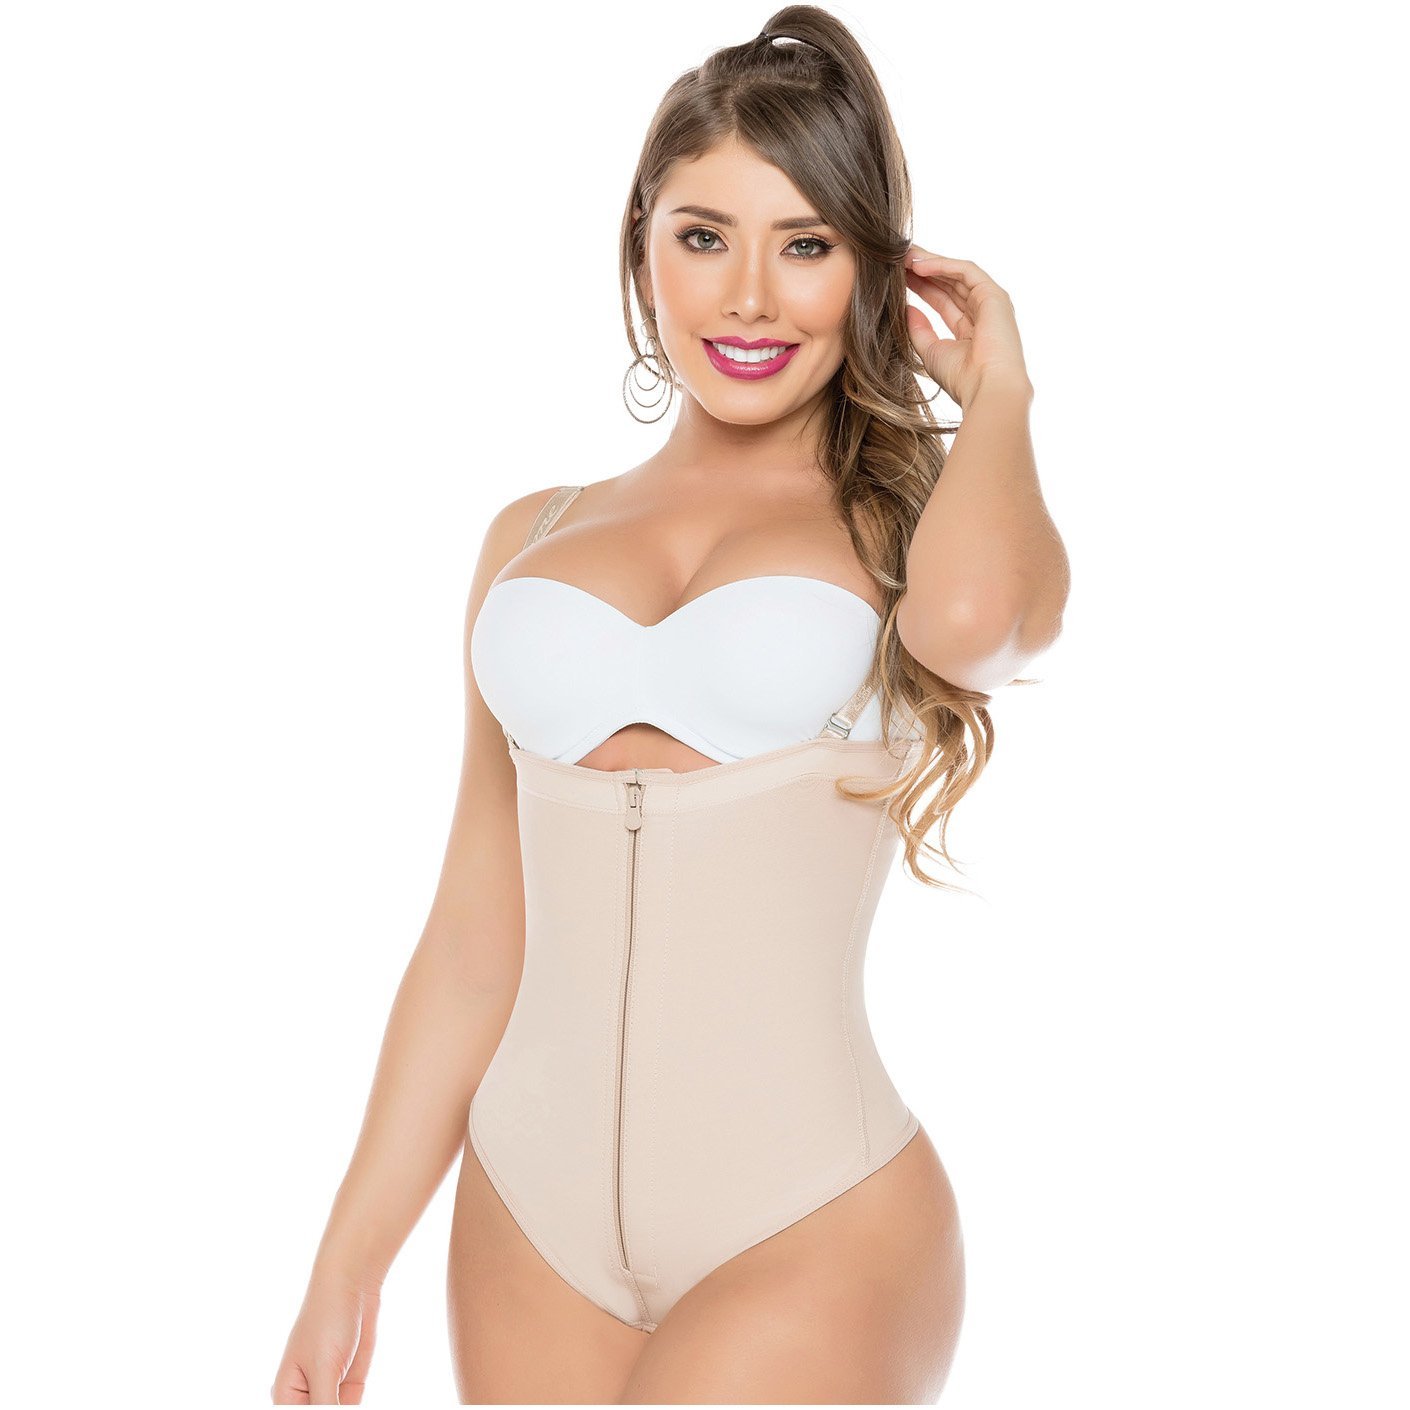 FAJAS SALOME 212 Strapless Thong Body Shaper - New England Supplier